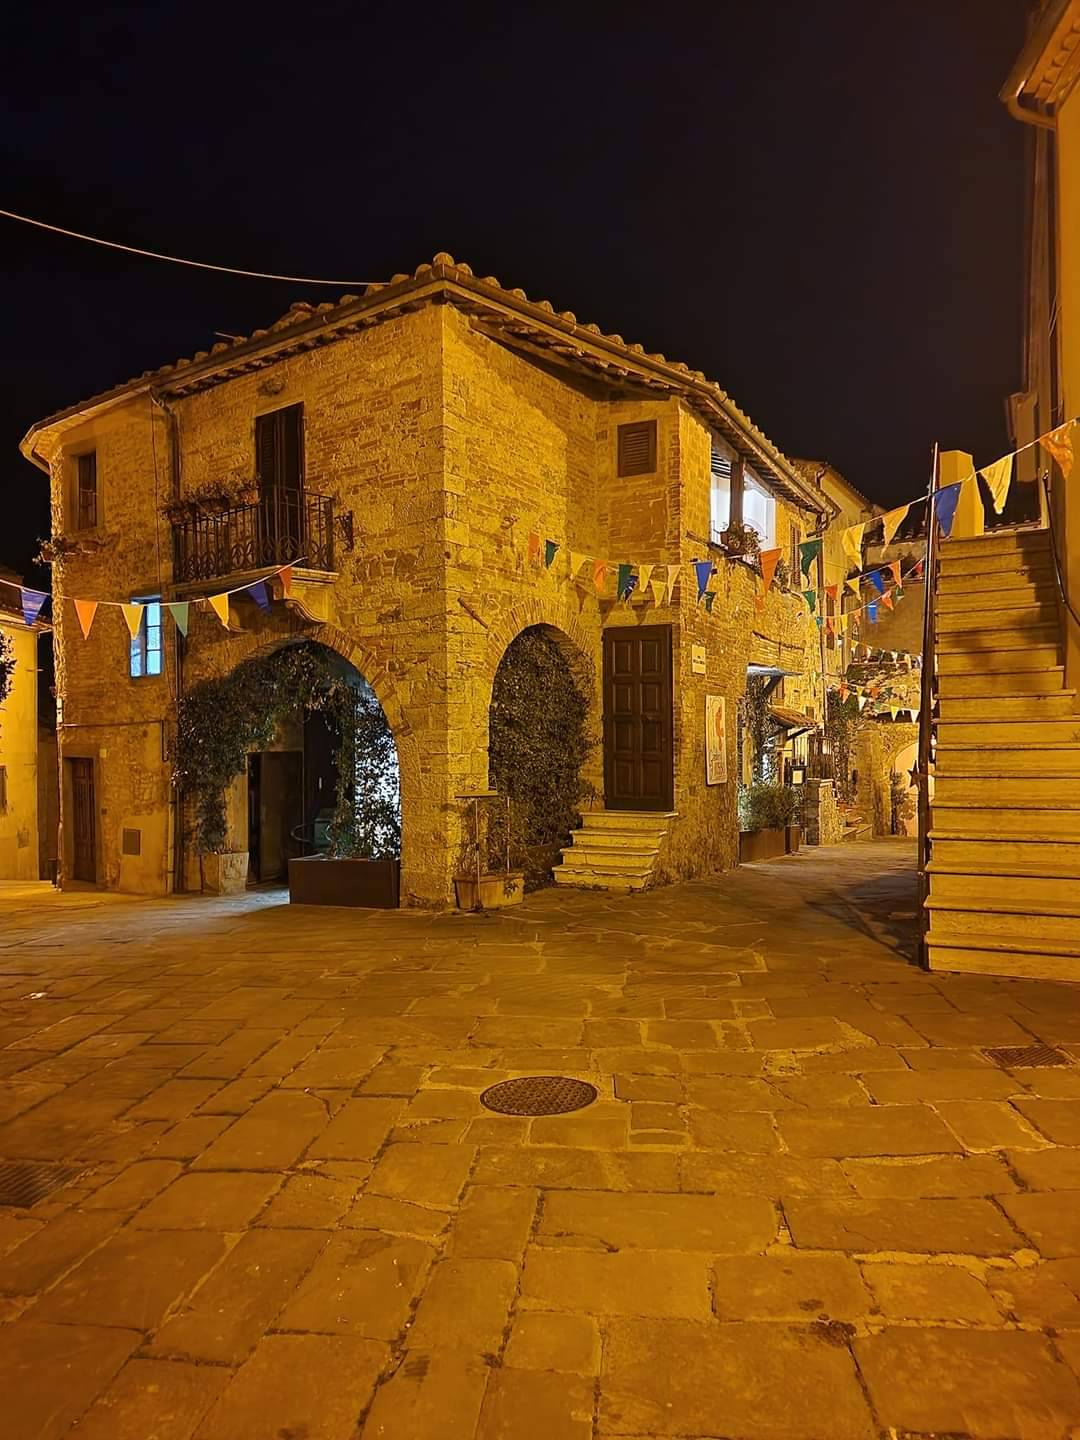 The magical village of Montemerano by night.